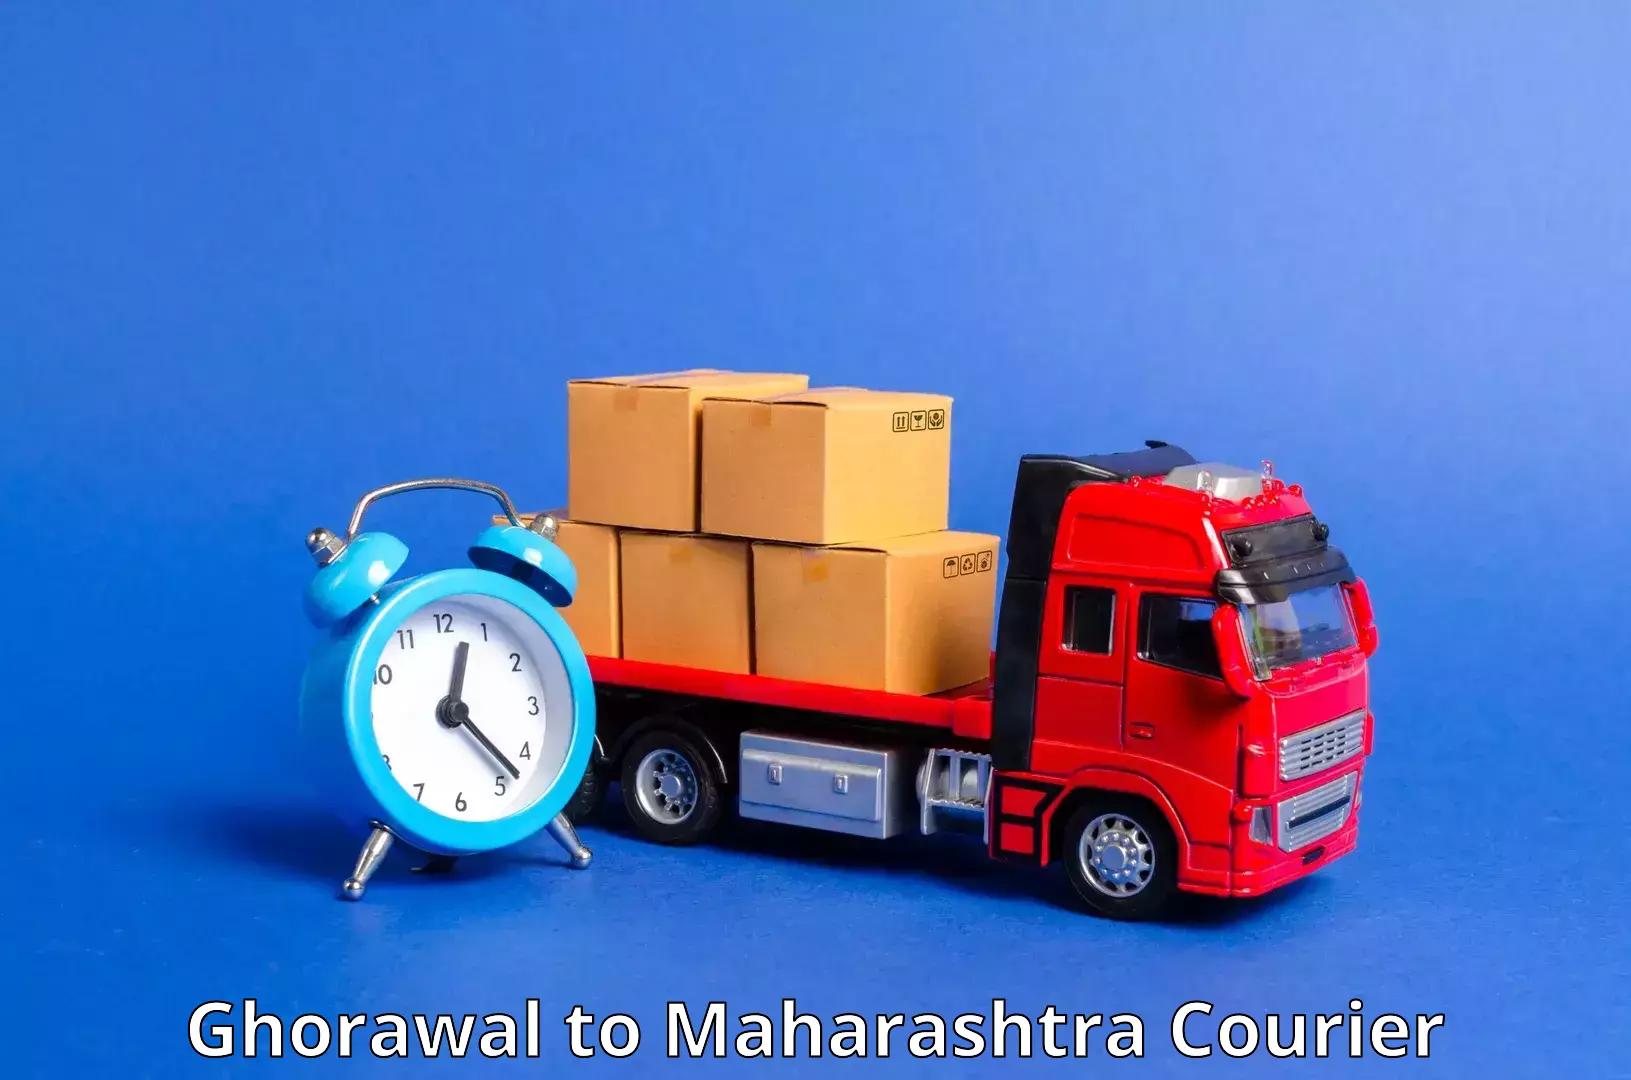 Courier services in Ghorawal to Gondpipri